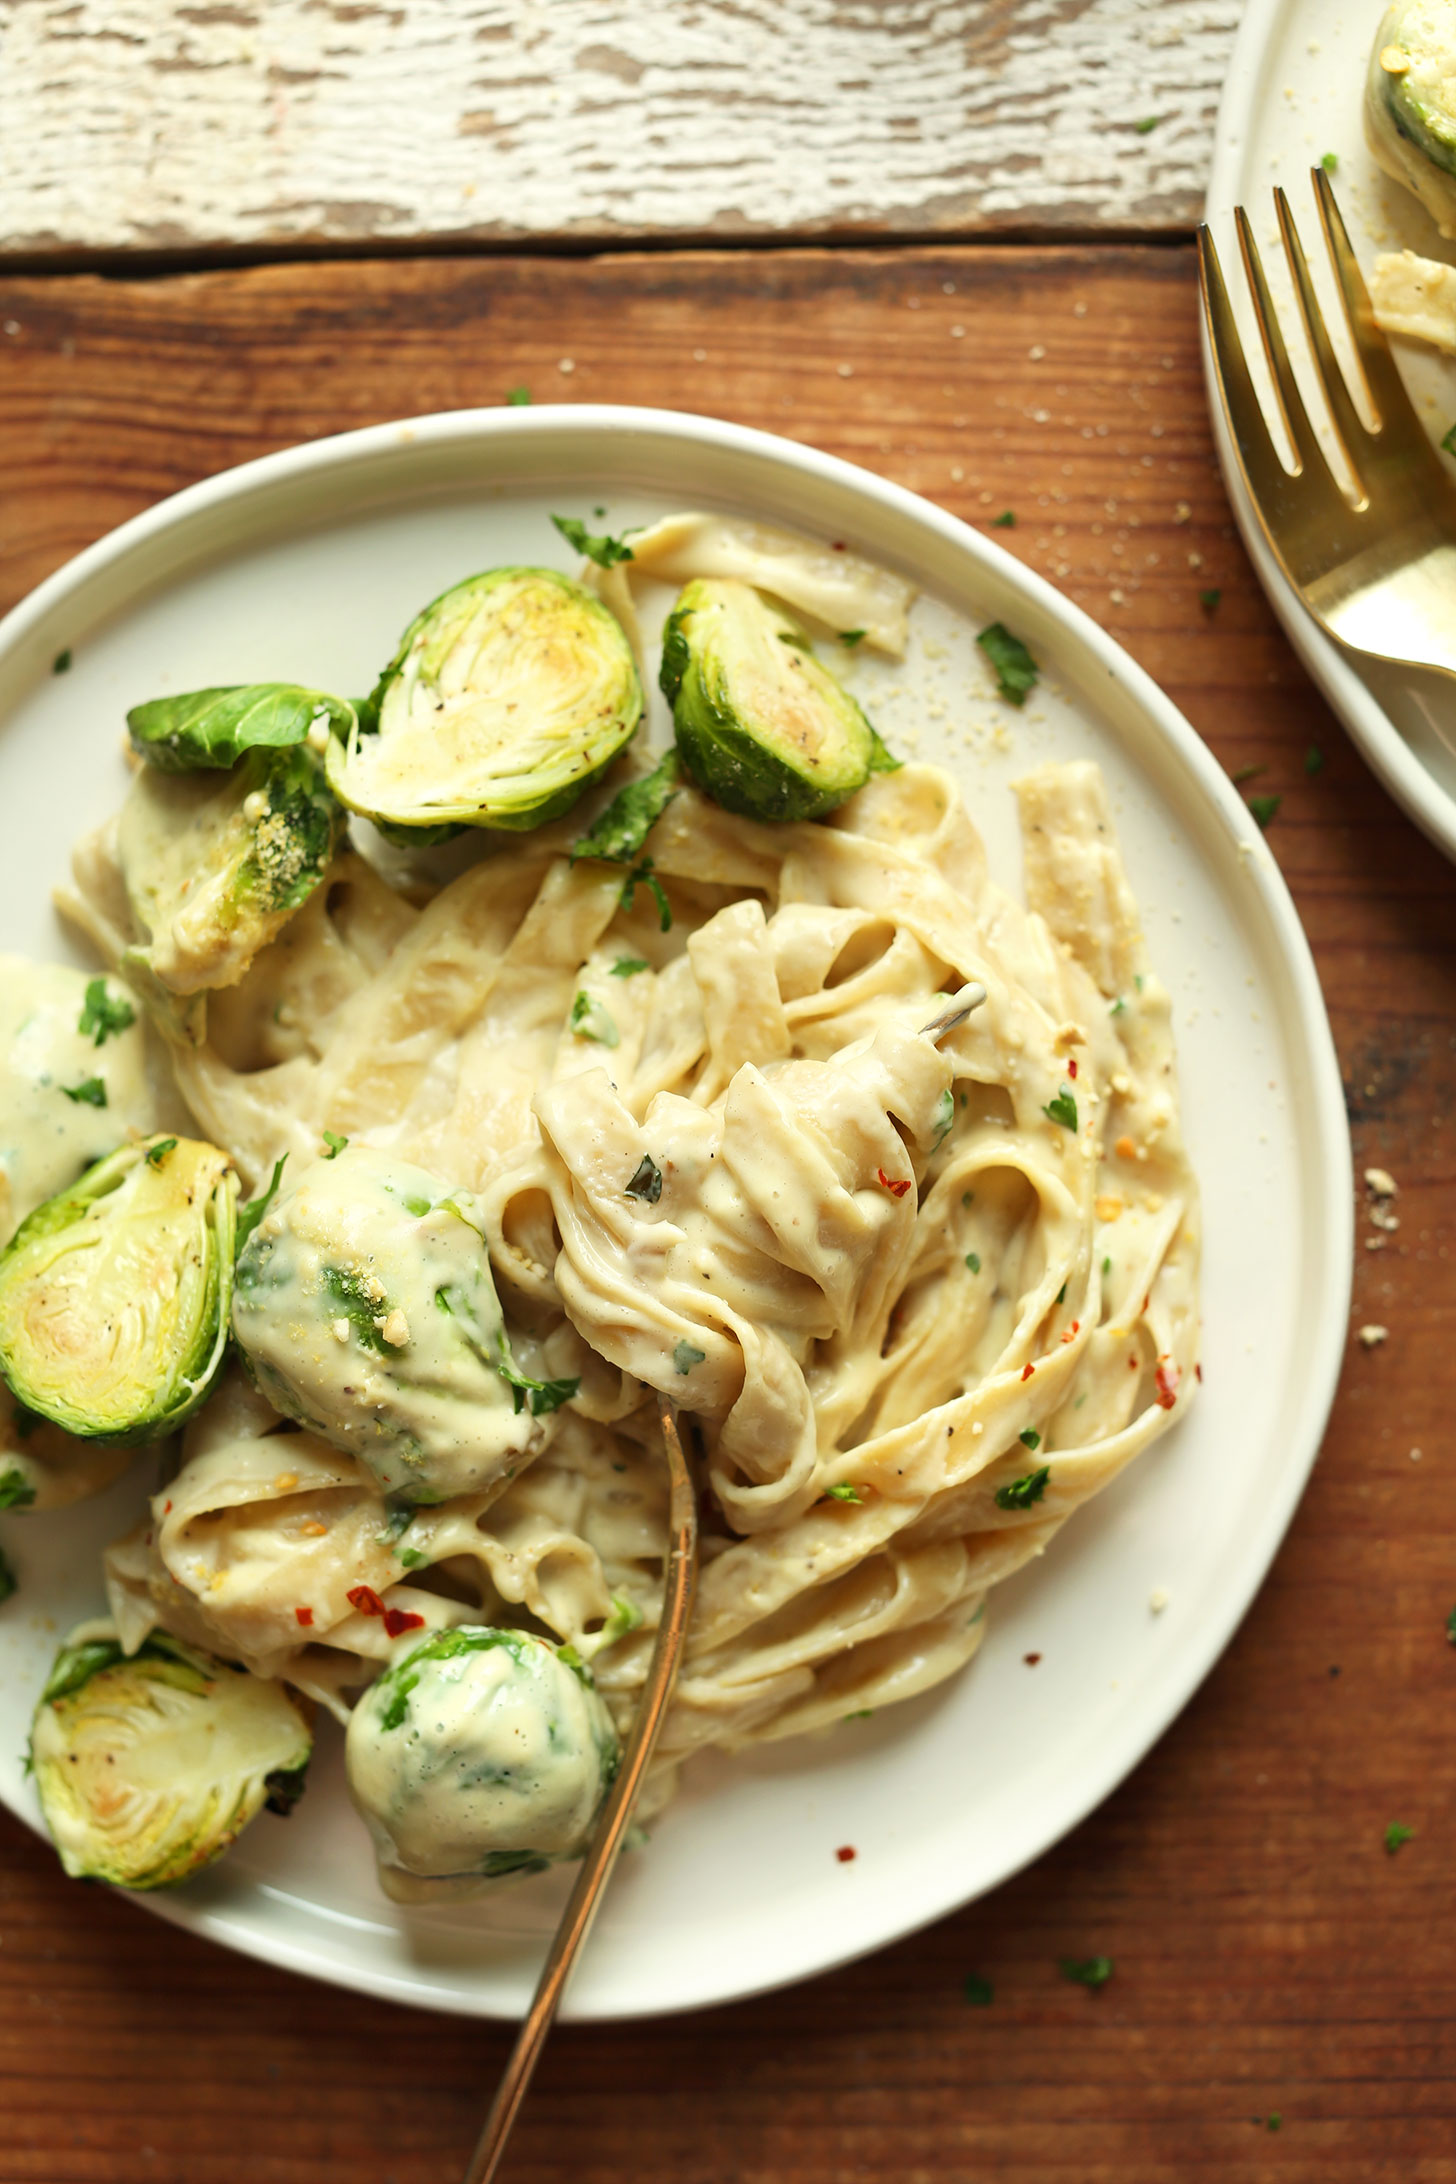 Incredible-30-minute-white-wine-garlic-pasta-with-roasted-brussels-sprouts-healthy-hearty-entirely-plantbased-vegan-glutenfree